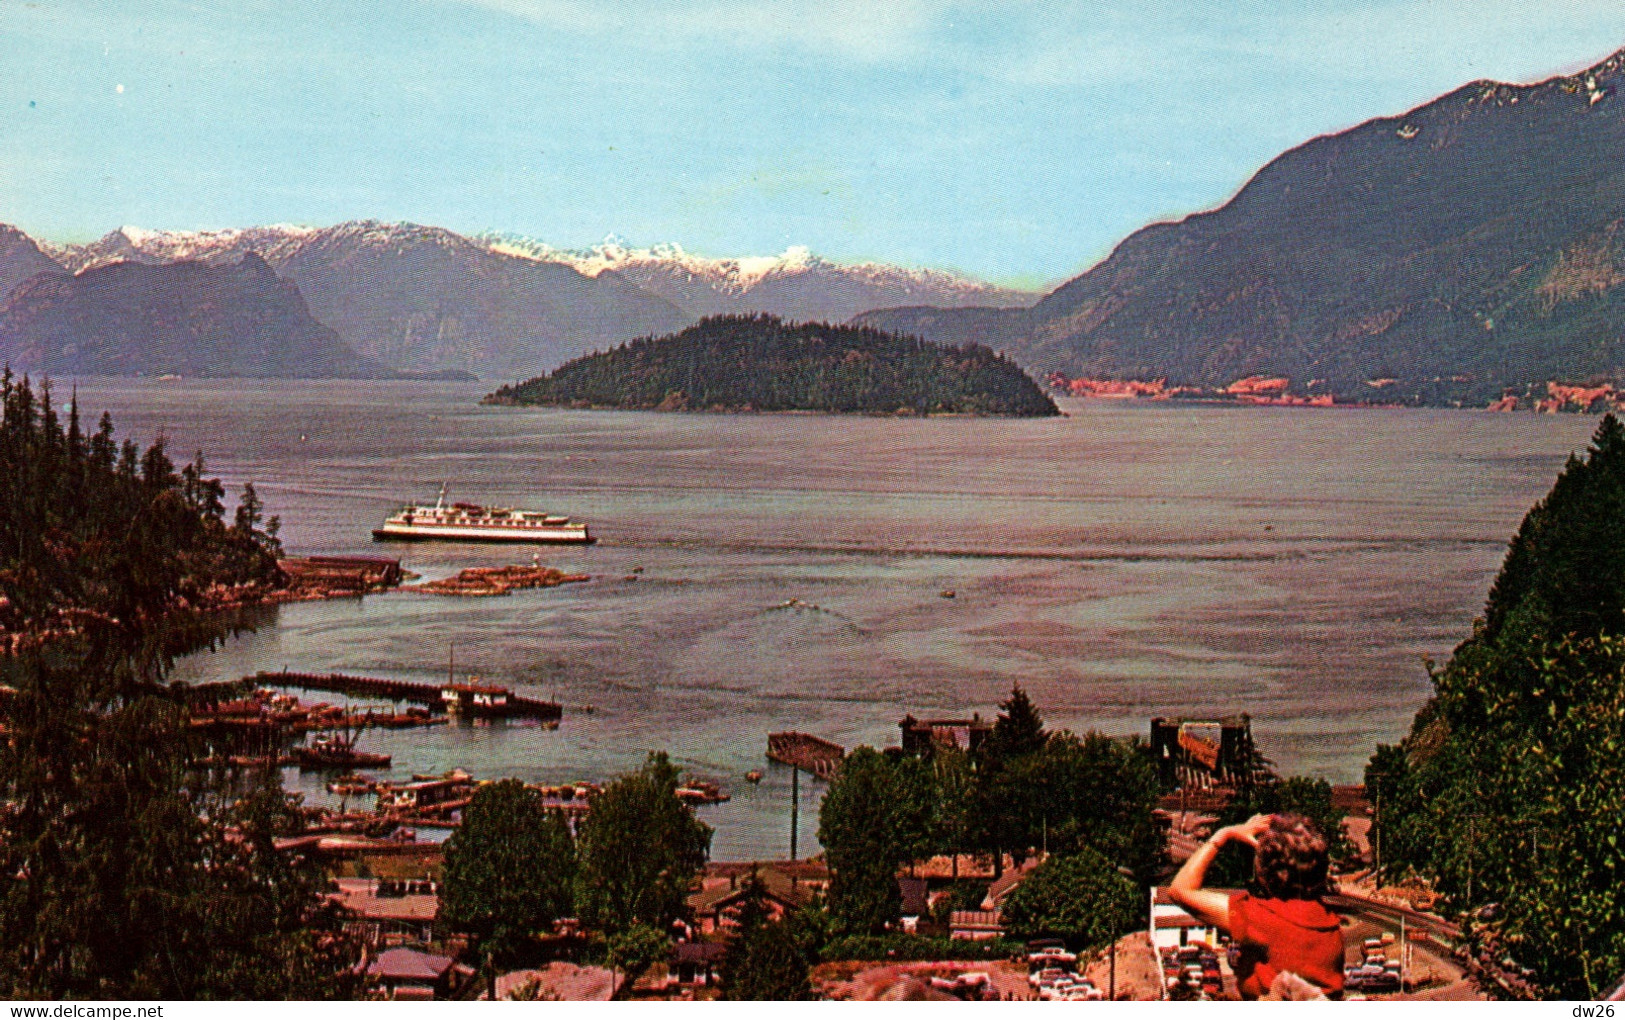 Canada - Horseshoe Bay, West Vancouver (Colombie Britannique) Published By Canadian National Railway - Vancouver